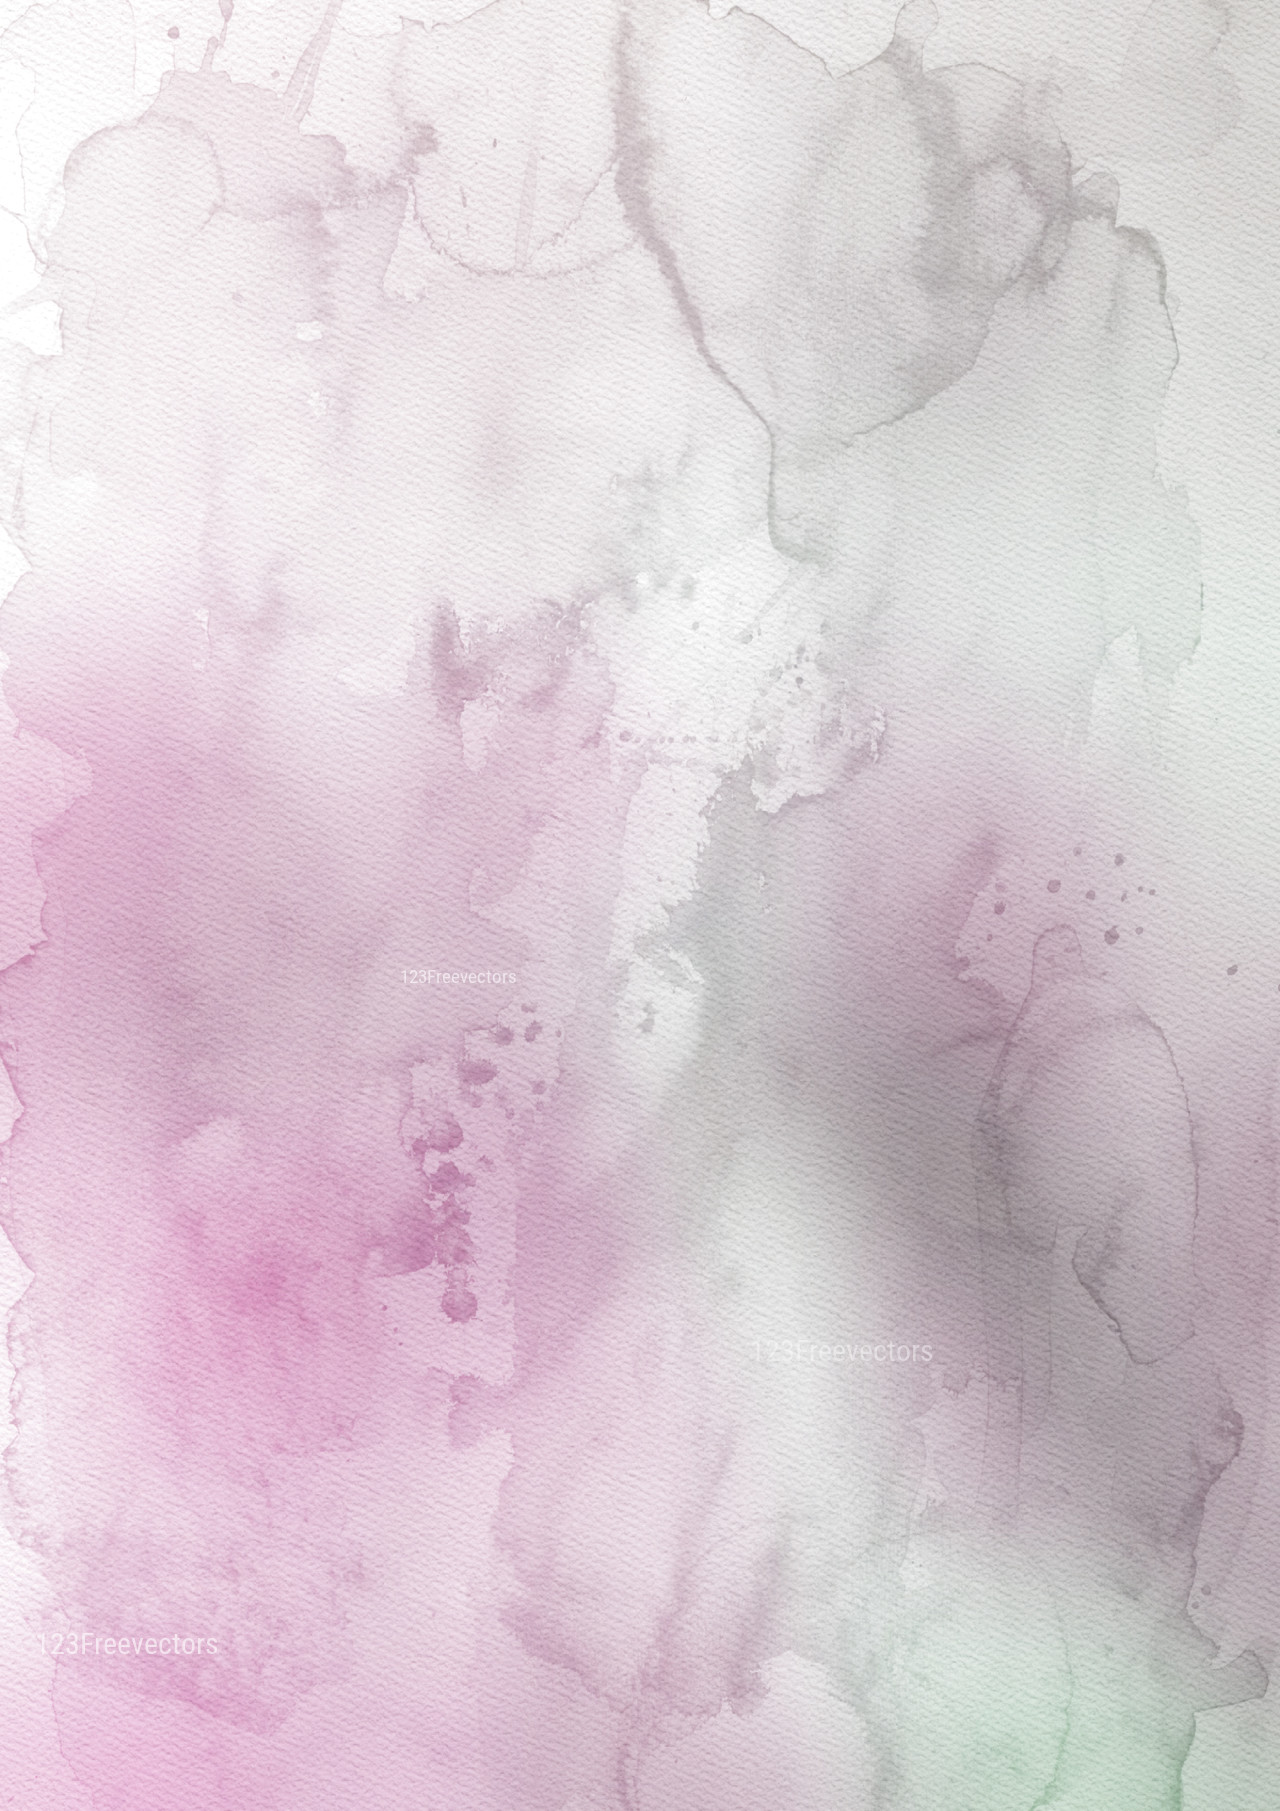 Pink and Grey Grunge Watercolour Texture Background